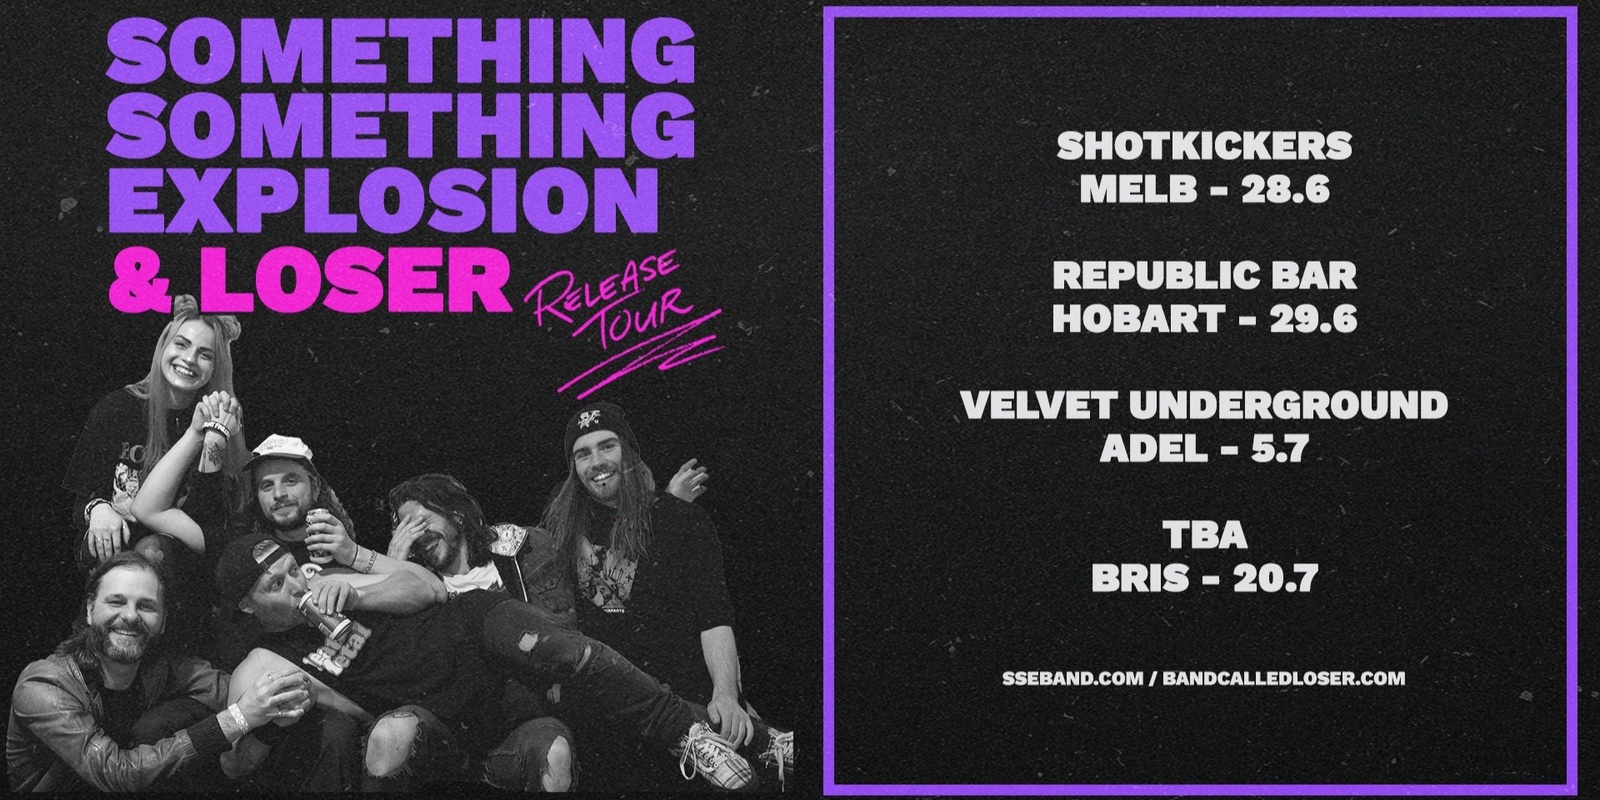 Banner image for SOMETHING SOMETHING EXPLOSION & LOSER RELEASE TOUR